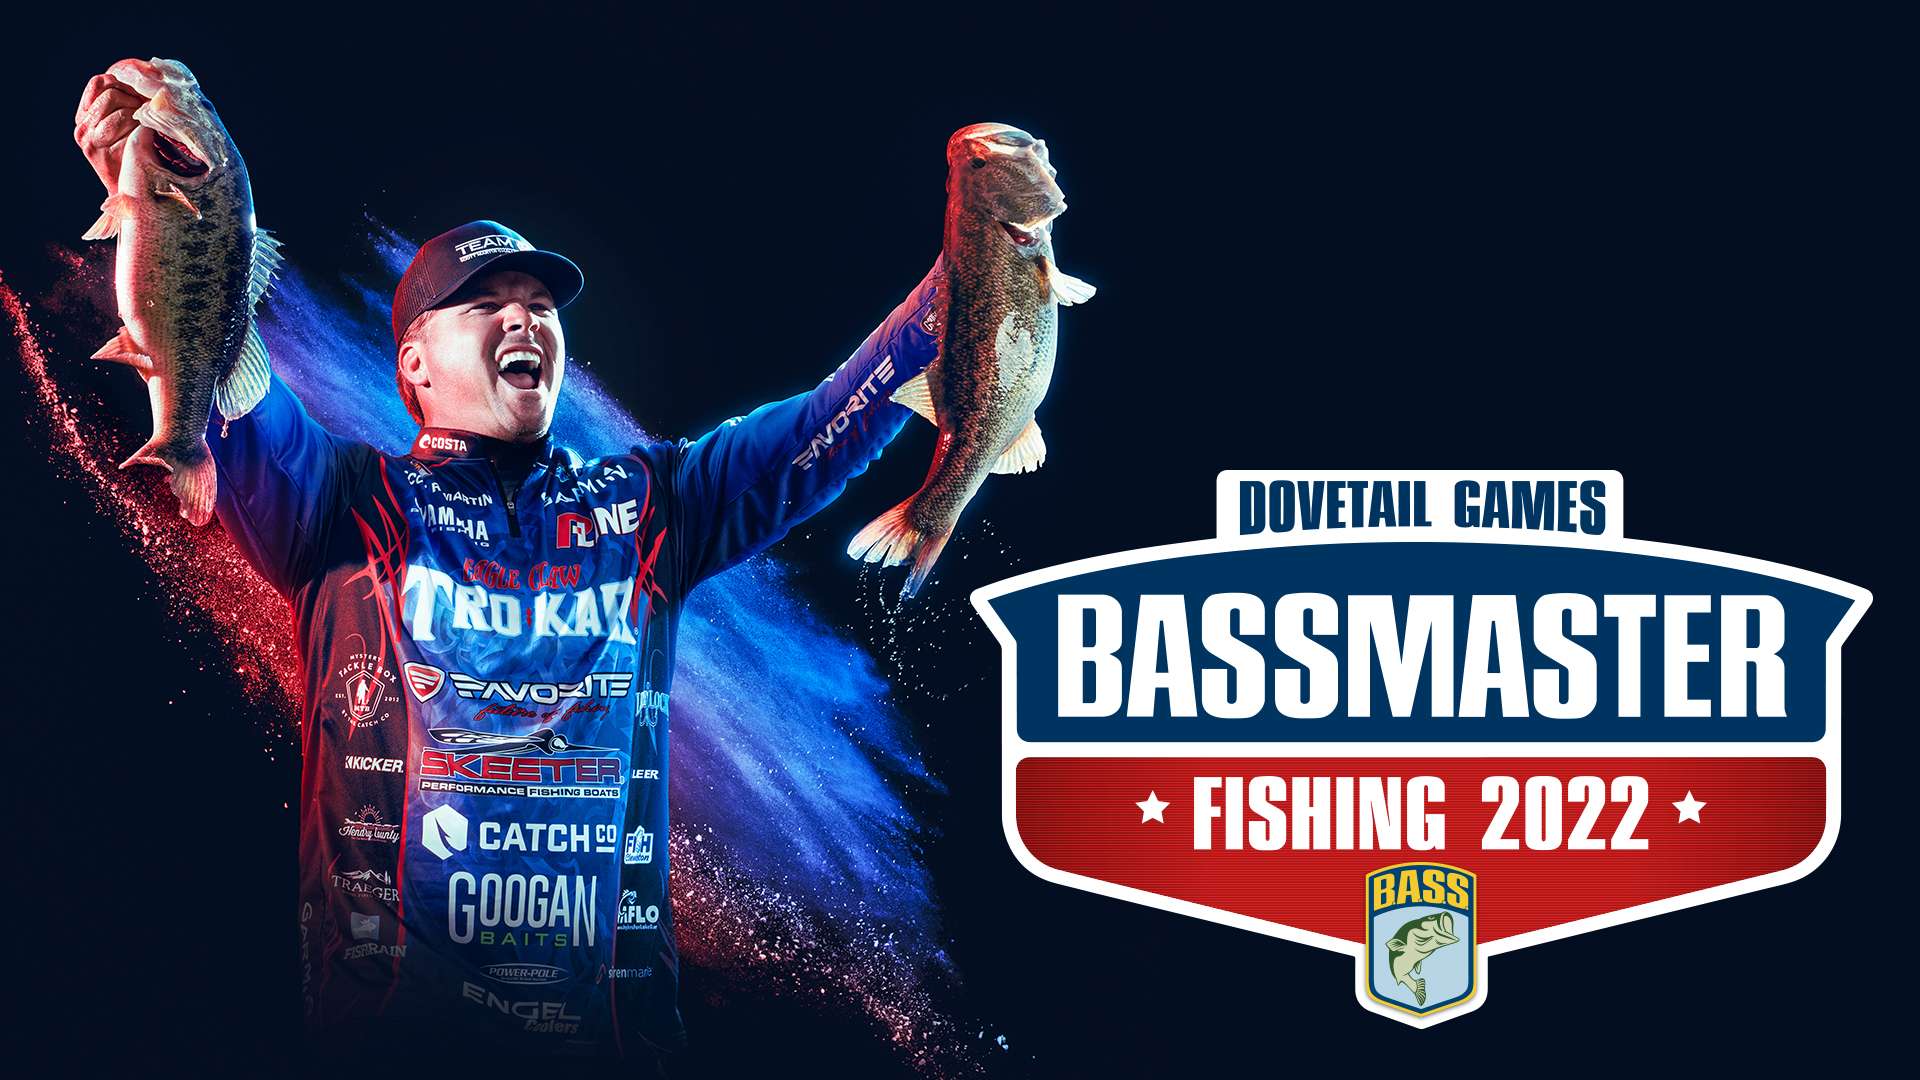 Bassmaster Fishing 2022 the video game coming this fall